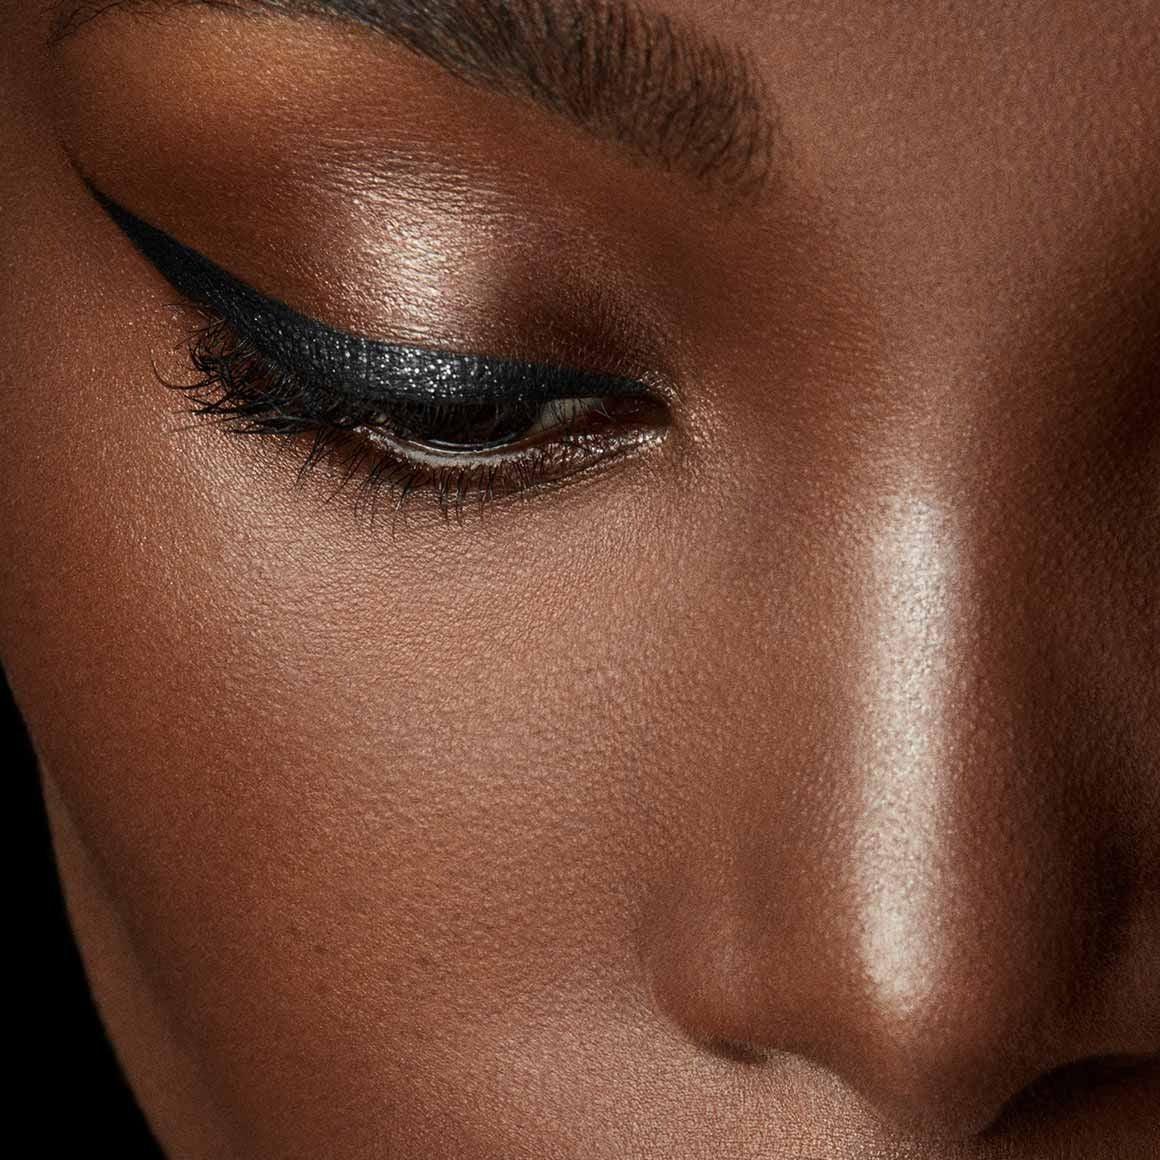 Fenty fly liner liquid eyeliner in the color "cuz I'm black" satin black color, A hyper-saturated, water-resistant liquid eyeliner with an innovative flex tip and easy-grip triangle shape for effortless no-limit lining that lasts.